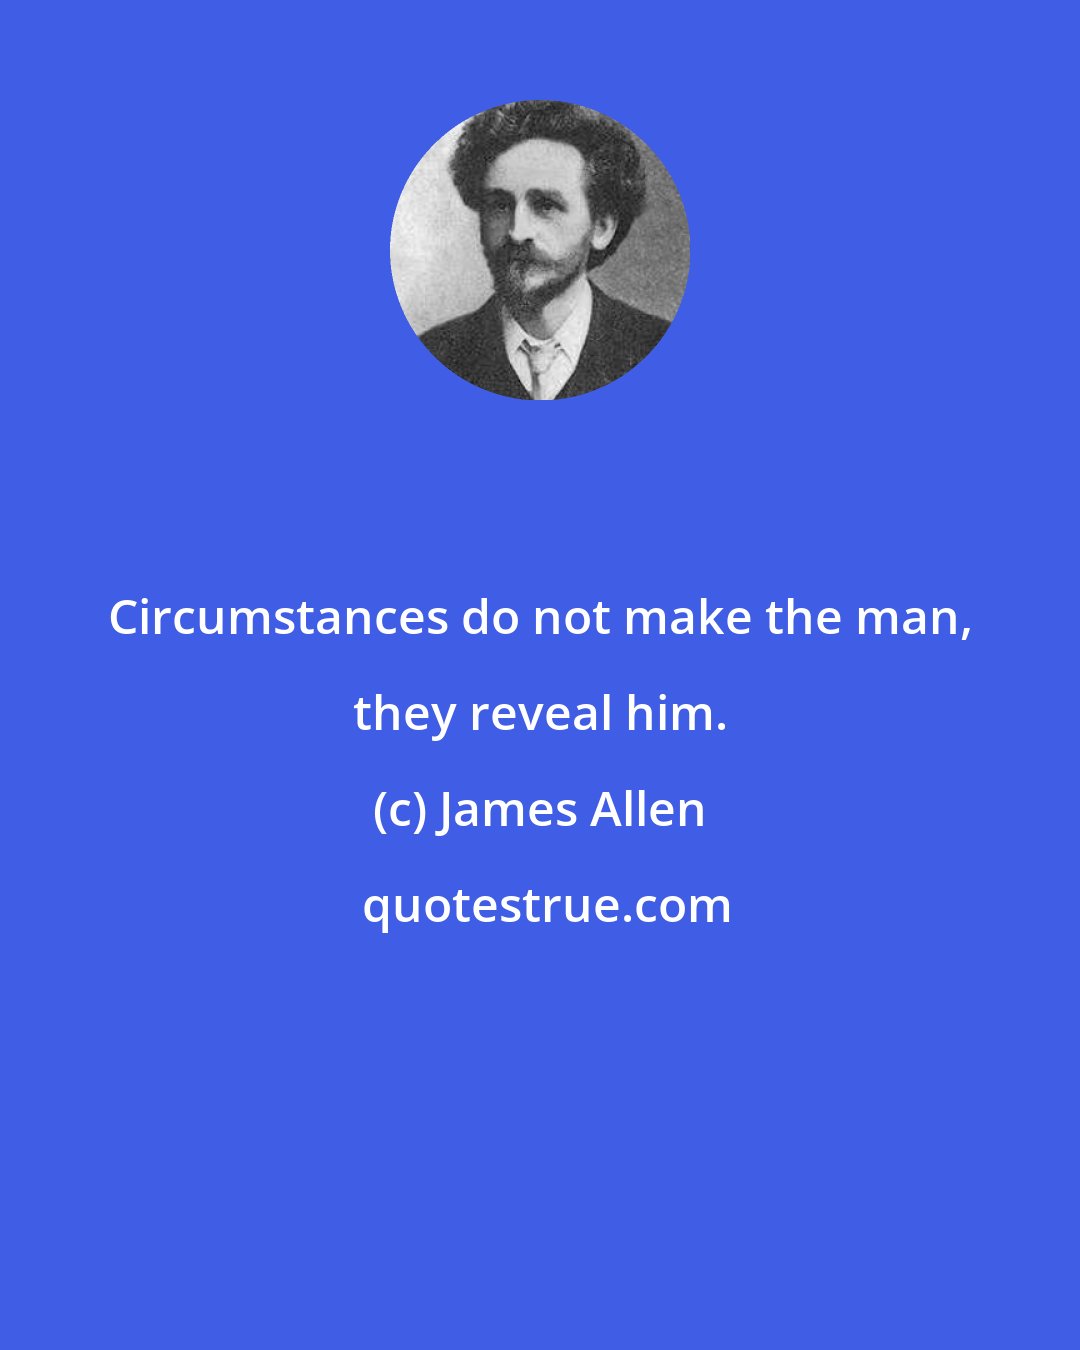 James Allen: Circumstances do not make the man, they reveal him.